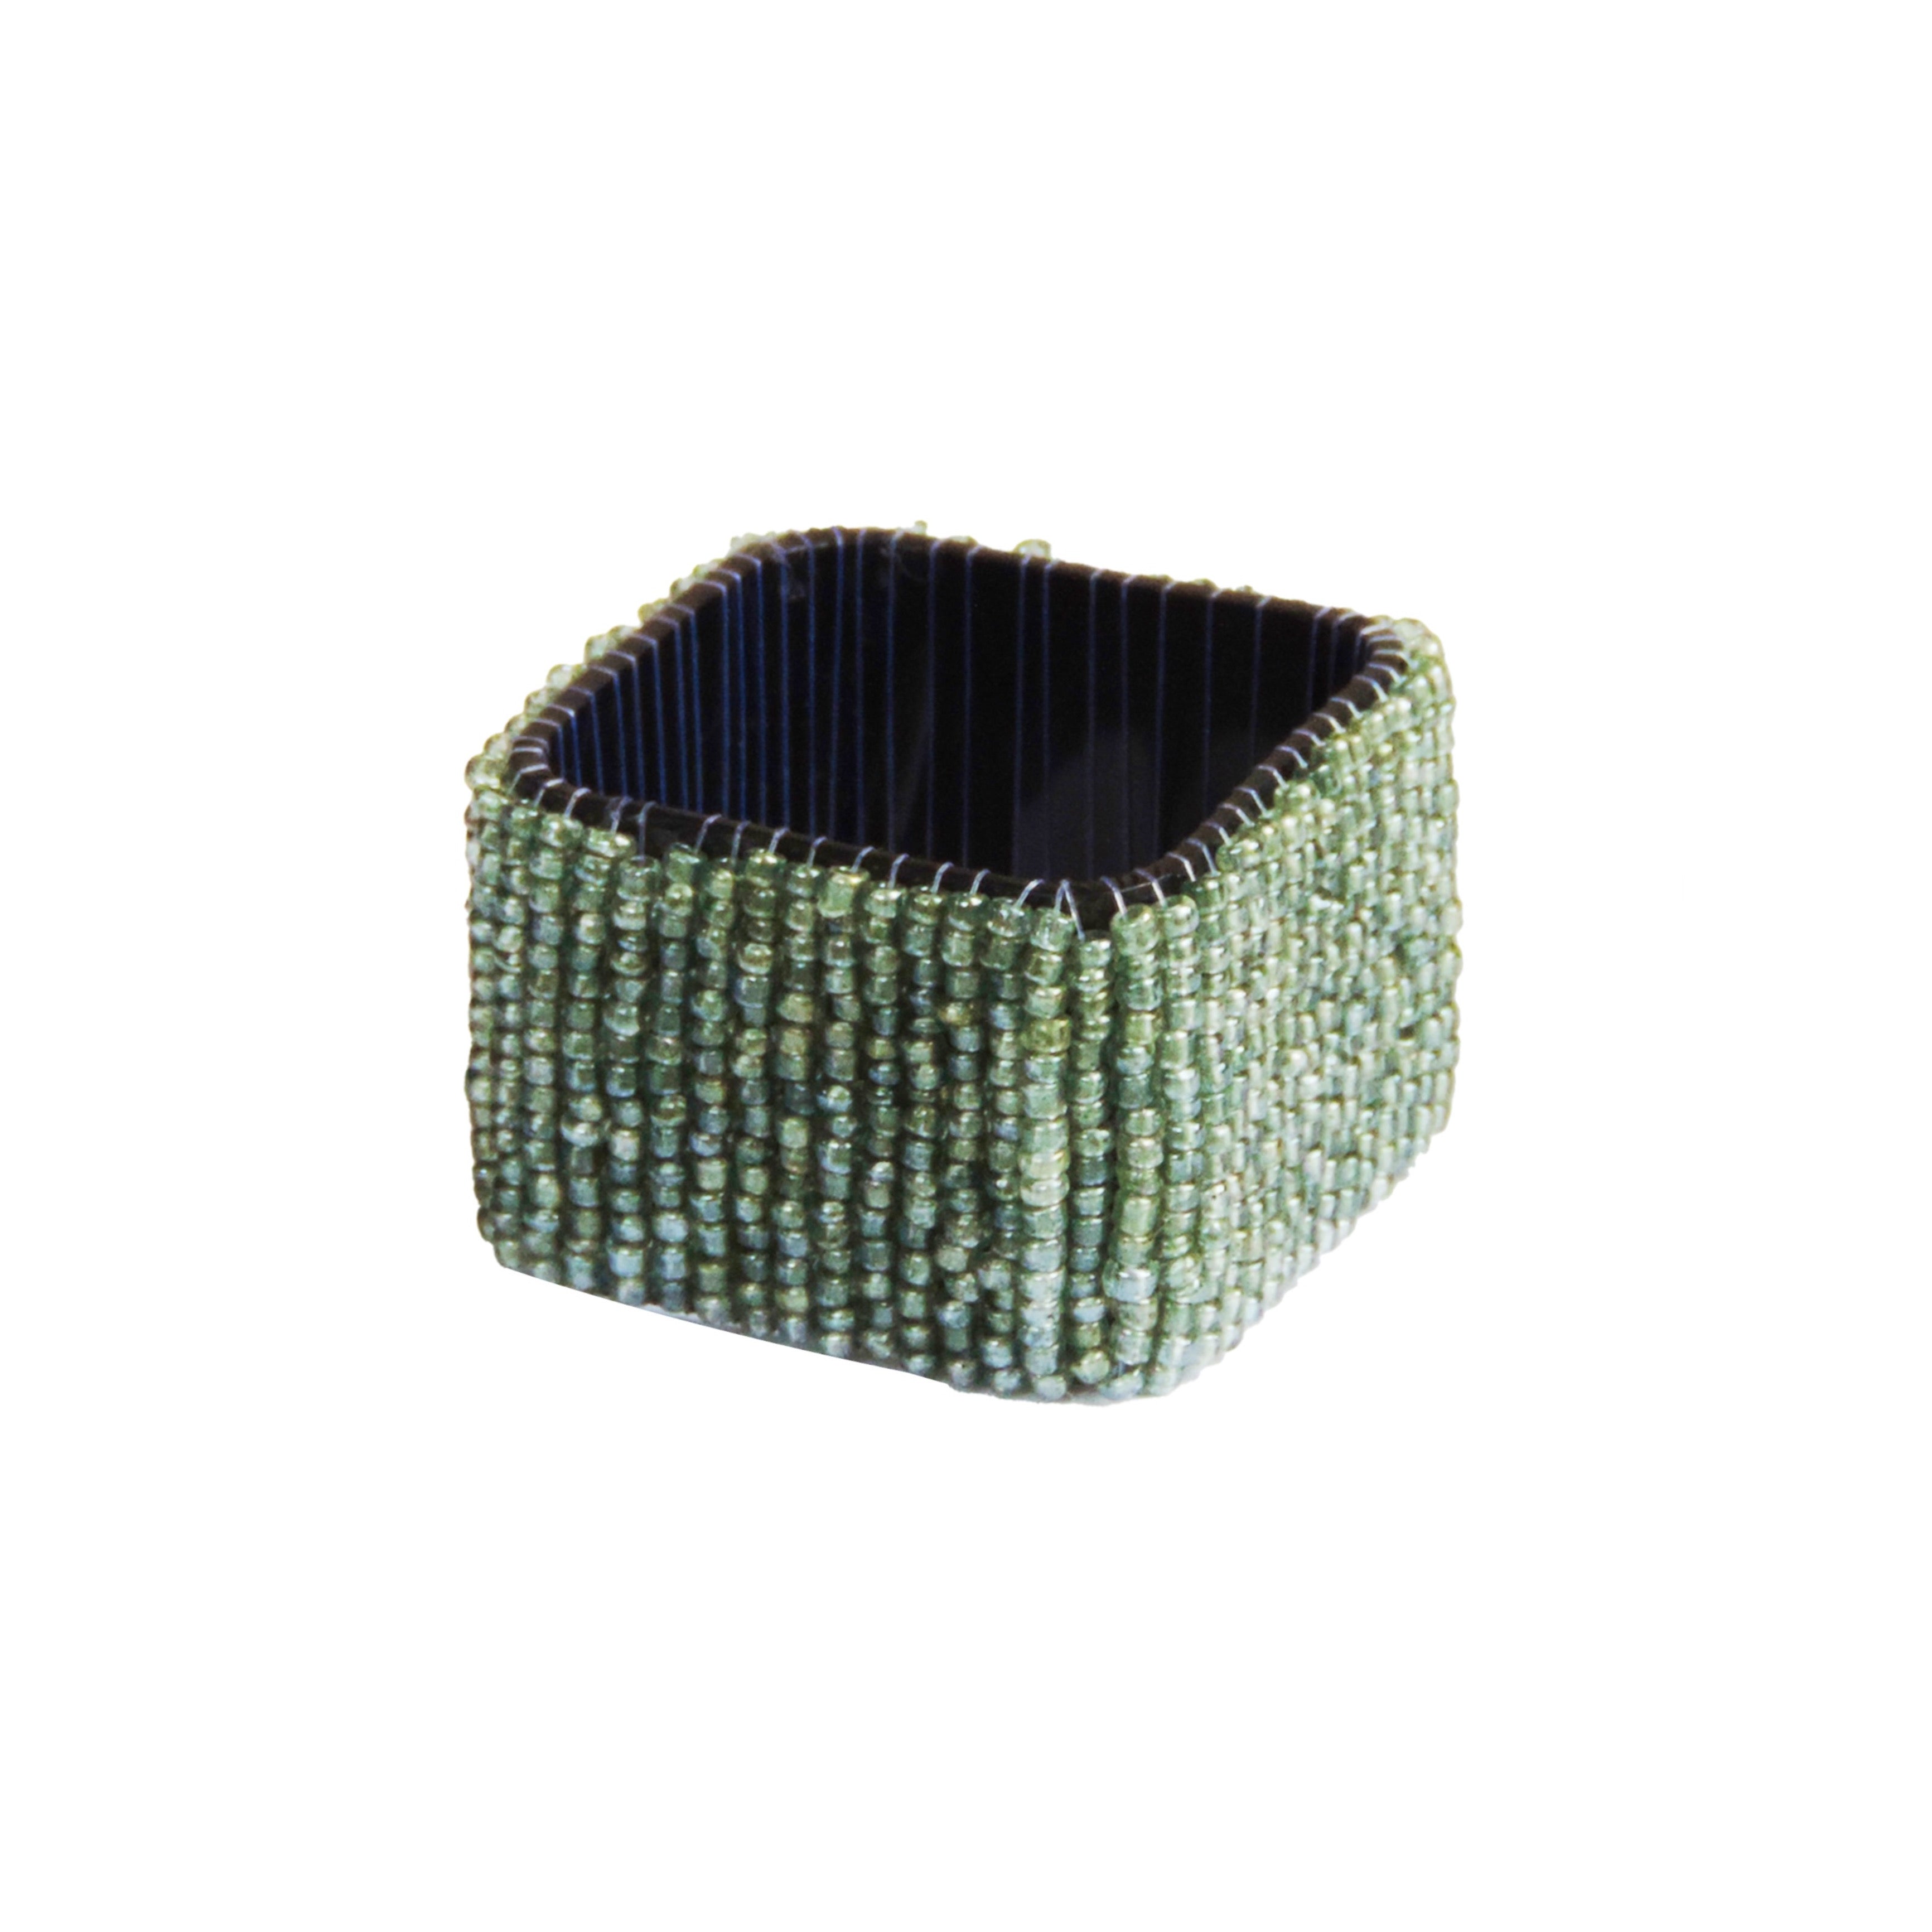 Classic Square Napkin Ring in Green, Set of 4